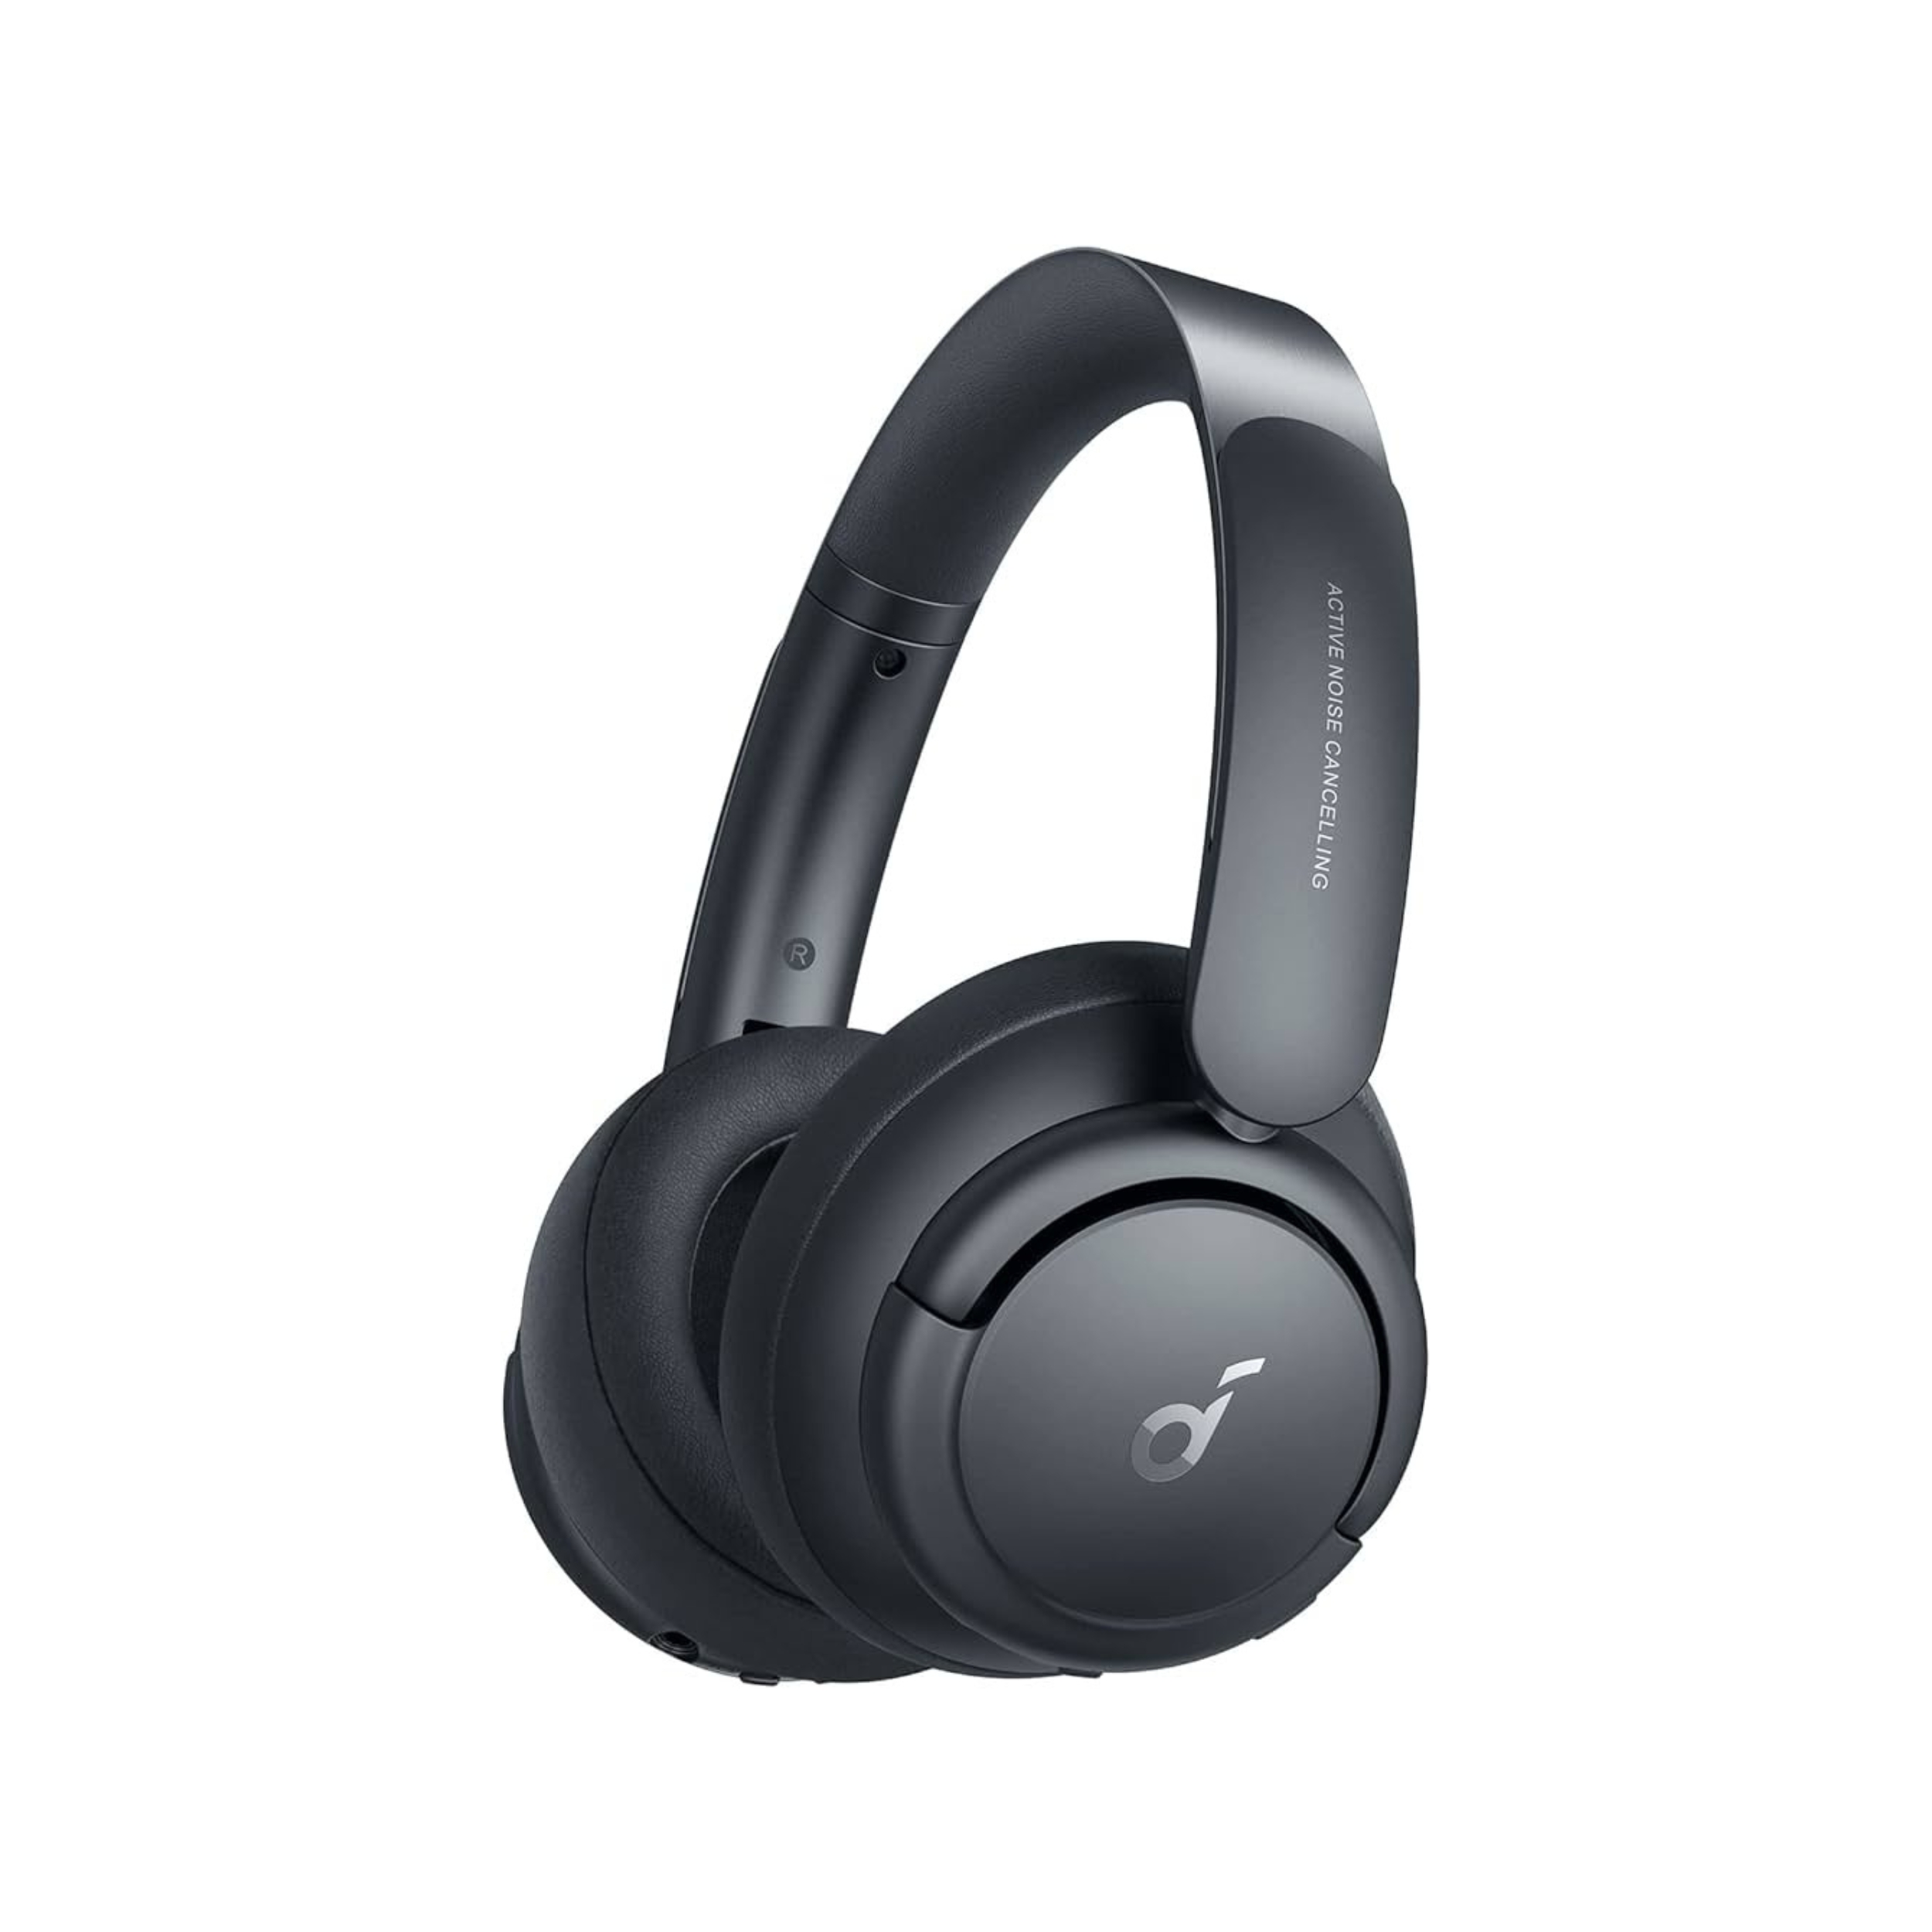 The Anker Soundcore Life Q35 offers a good balance of features, especially for travelers and remote workers. It’s not the most premium headset, but it gets the job done without breaking the bank.